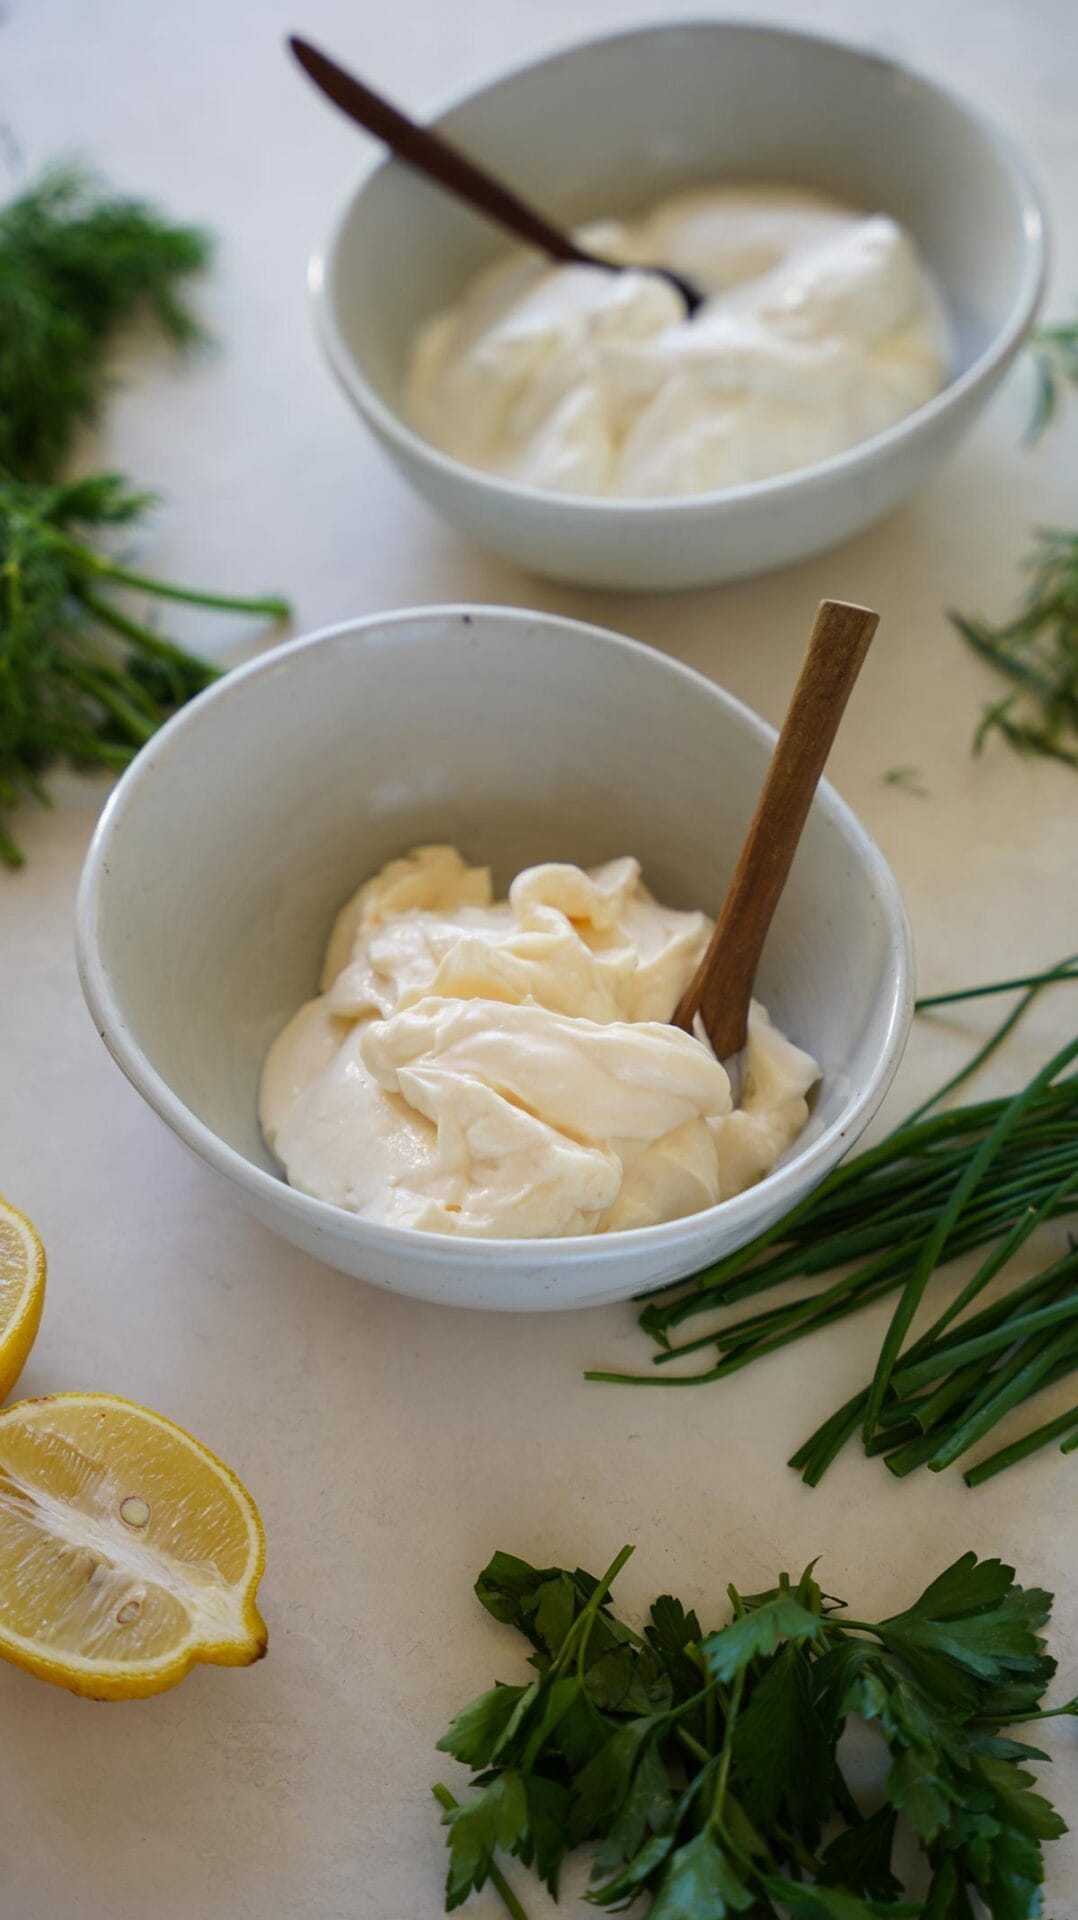 Mayonnaise and sour cream in bowls with fresh herbs and lemon.